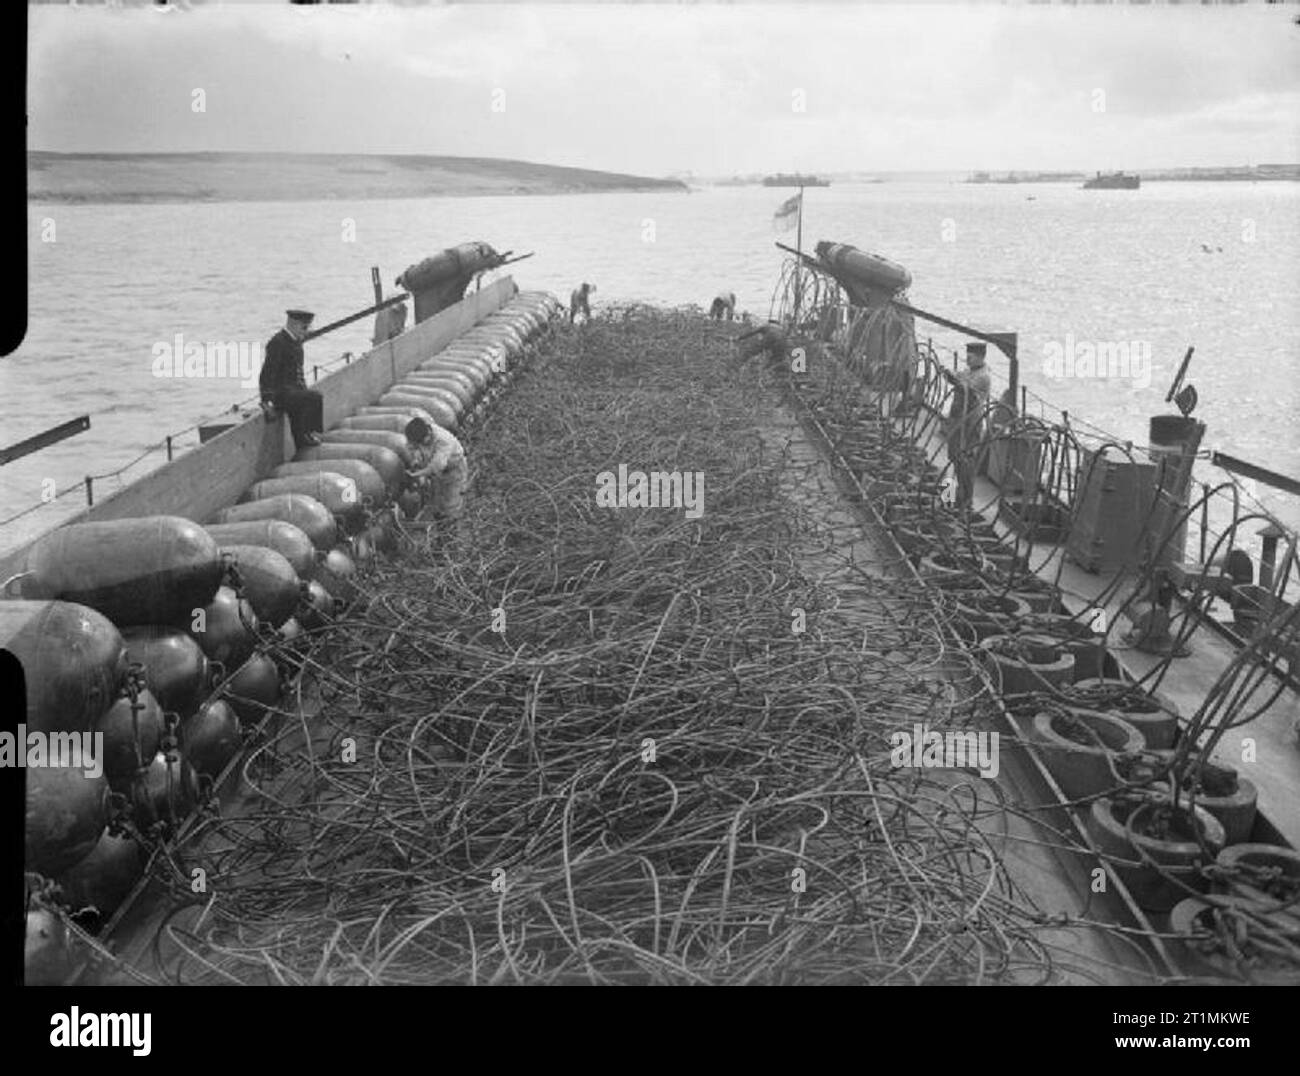 The Royal Navy during the Second World War At Scapa Flow, a net laying vessel. This specially adapted vessel lays anti-submarine or anti-torpedo net whilst underway. The net in this picture, with weights and floats attached, is 900 feet long, weighs over 40 tons and can be laid in 4 minutes. Stock Photo